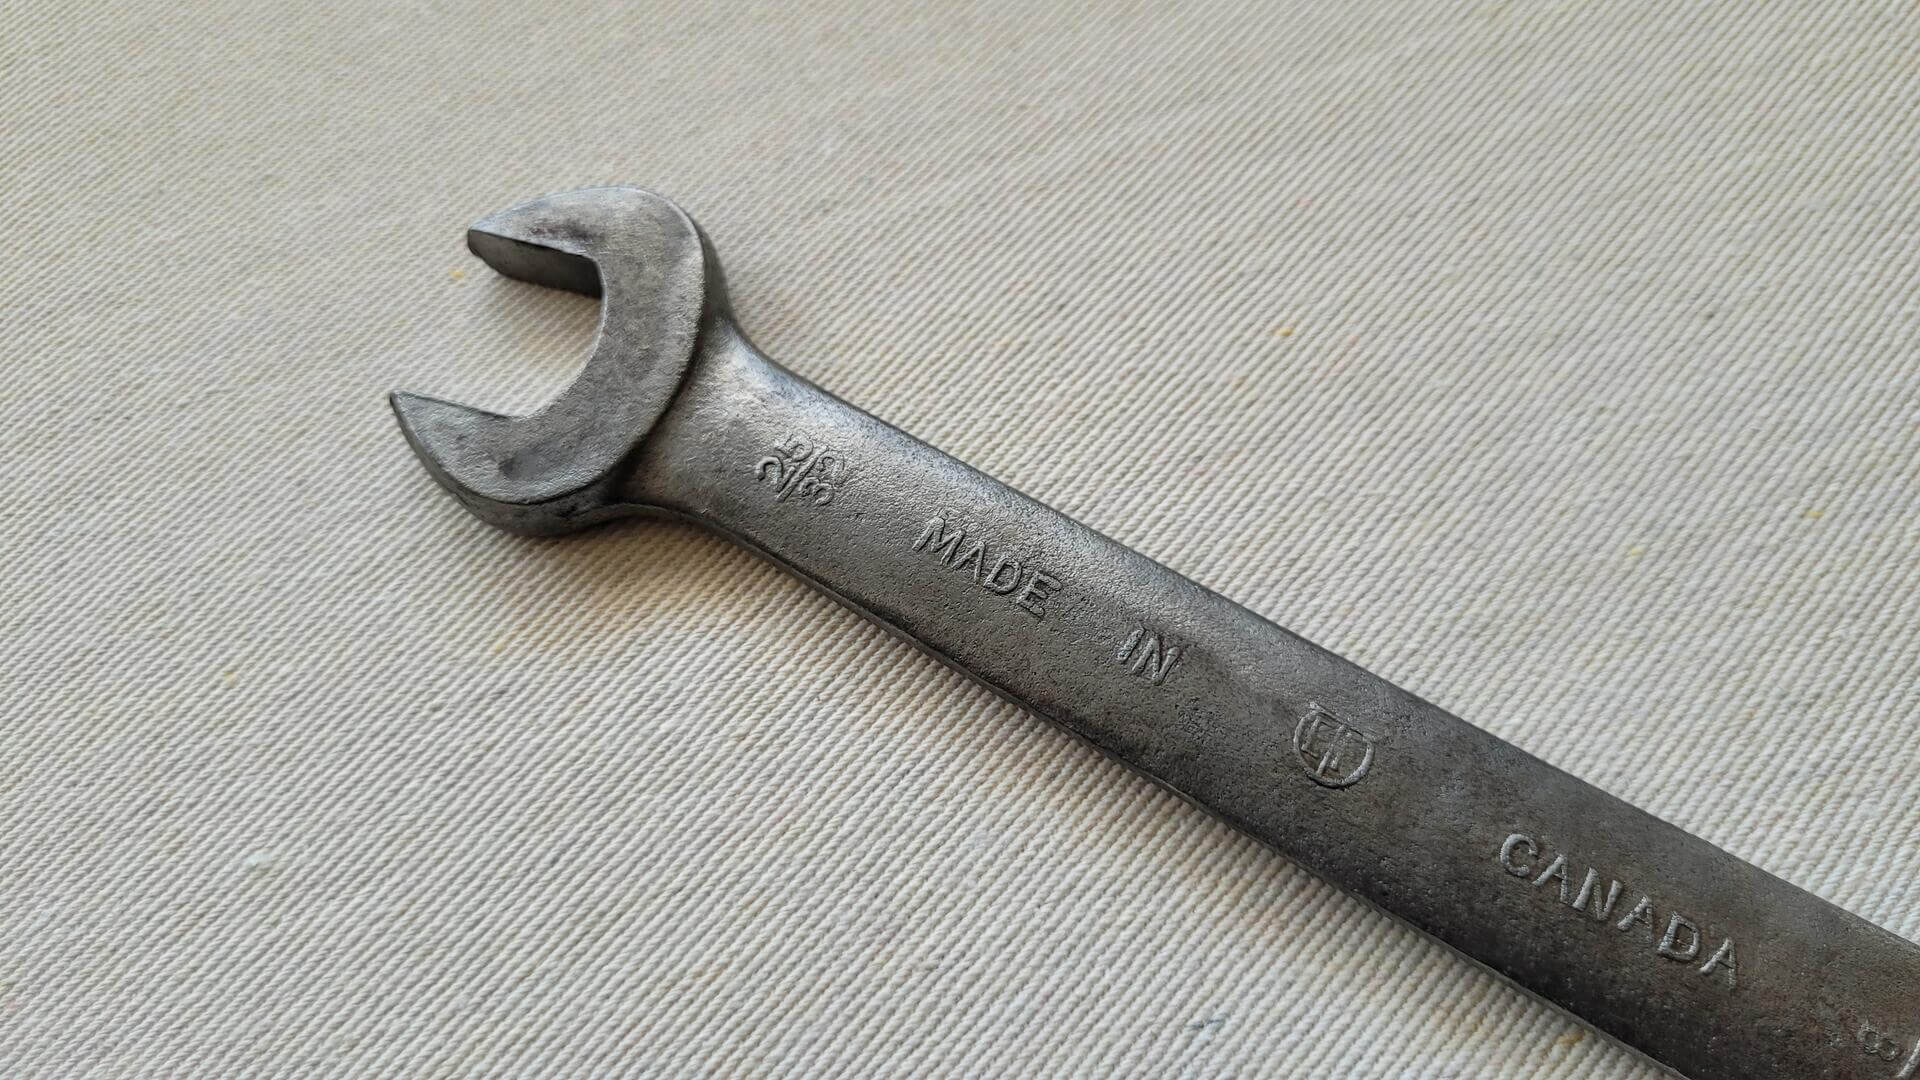 Rare antique open end wrench spanner 25/32" x 7/8" by ETF Engineering Tools & Forging from St. Catharines Ontario. Vintage made in Canada collectible automotive and mechanic hand tools